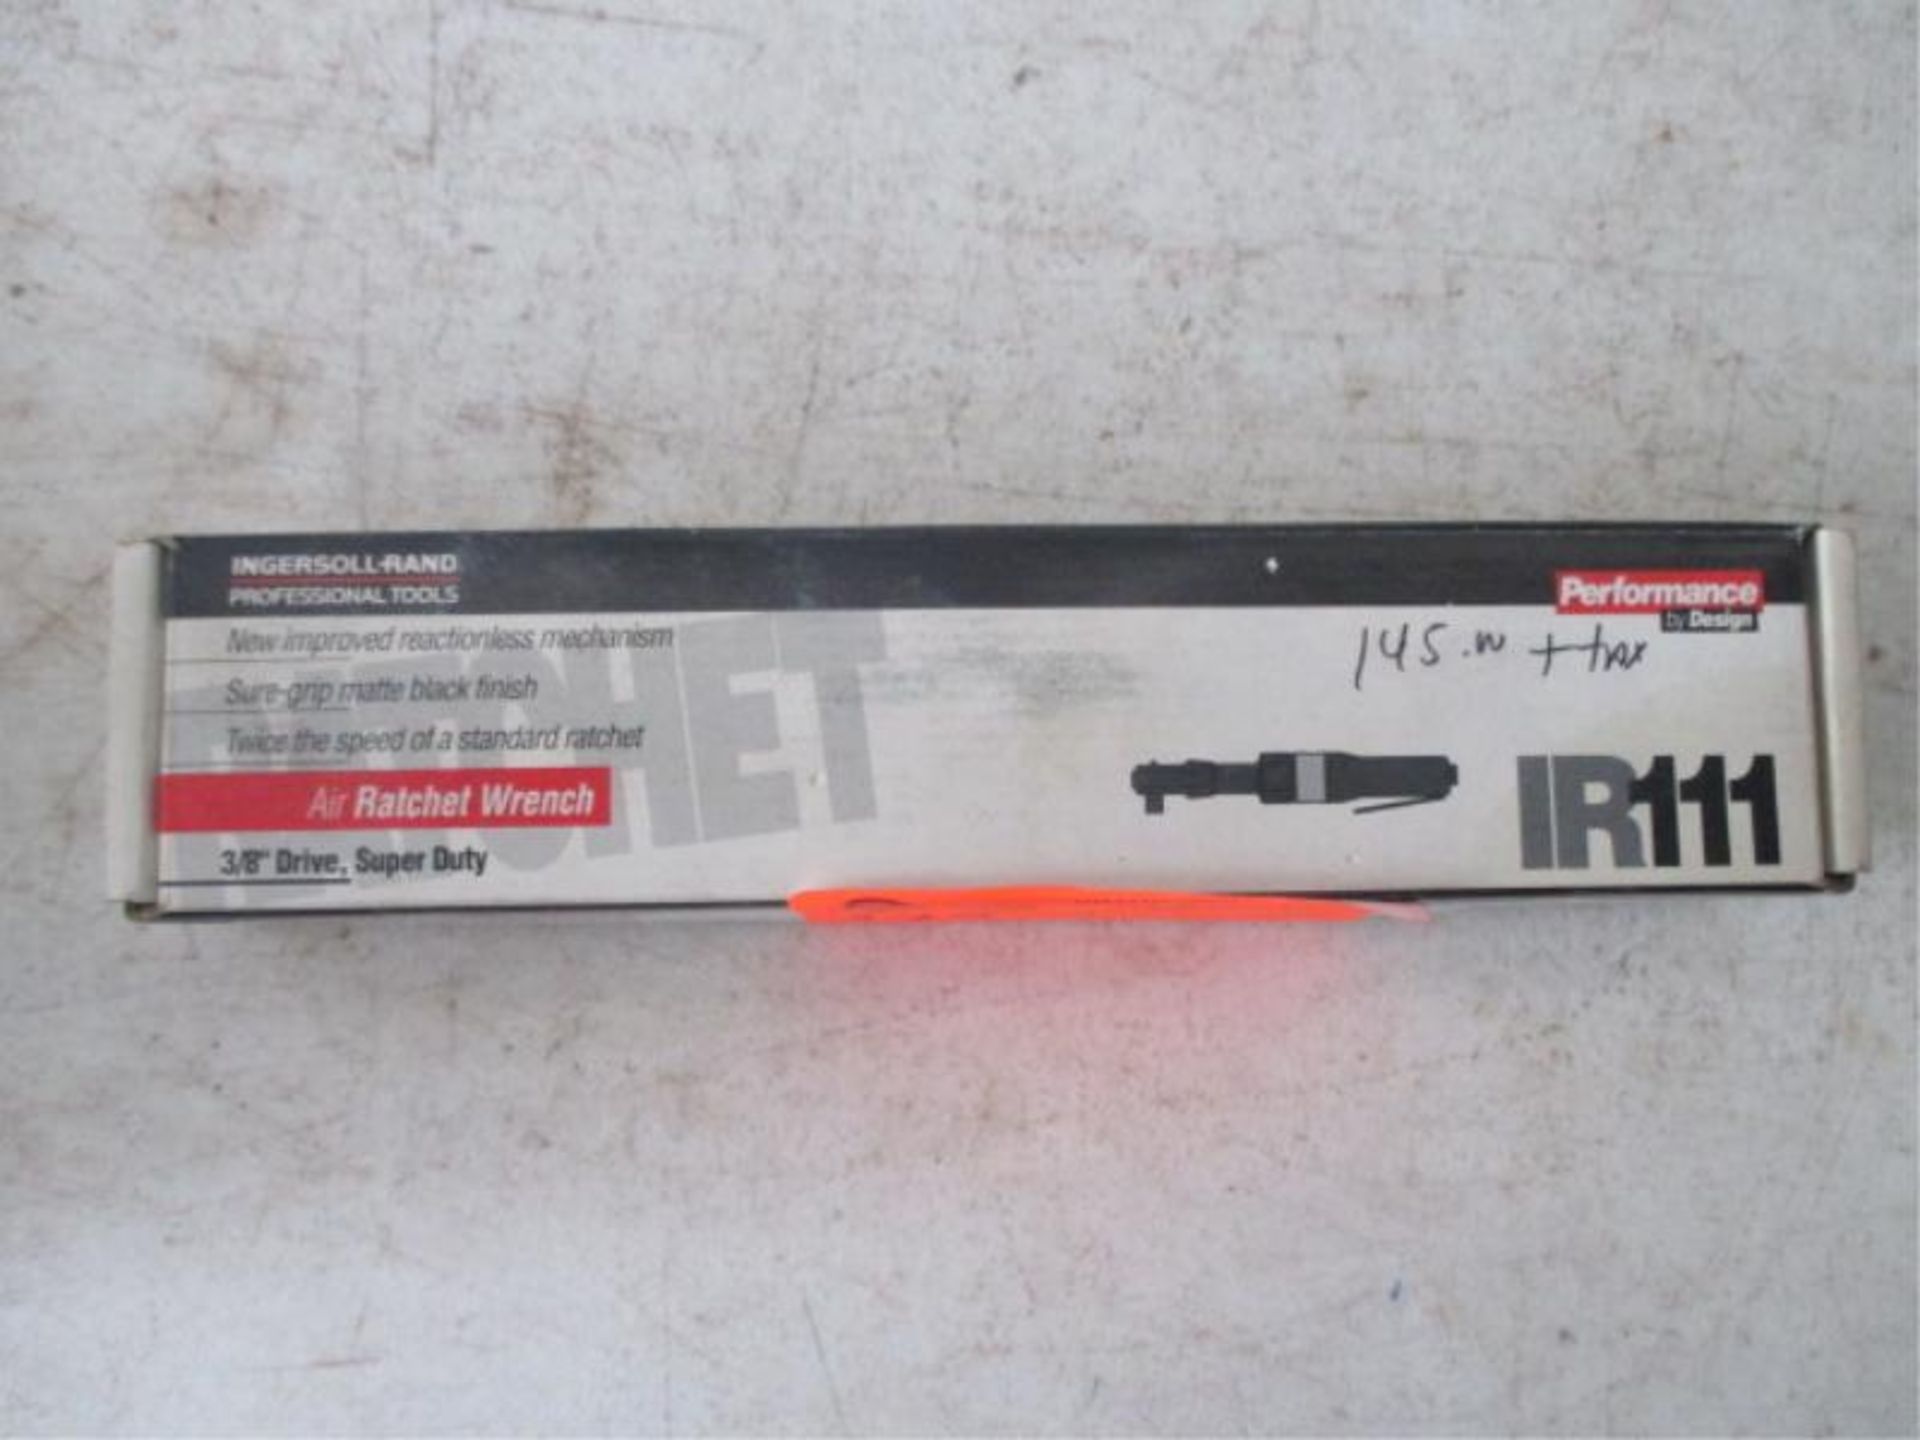 Air Ratchet Wrench, 3/8" Drive, Ingersol Rand, Super Duty, New in Box Super Duty, New in Box